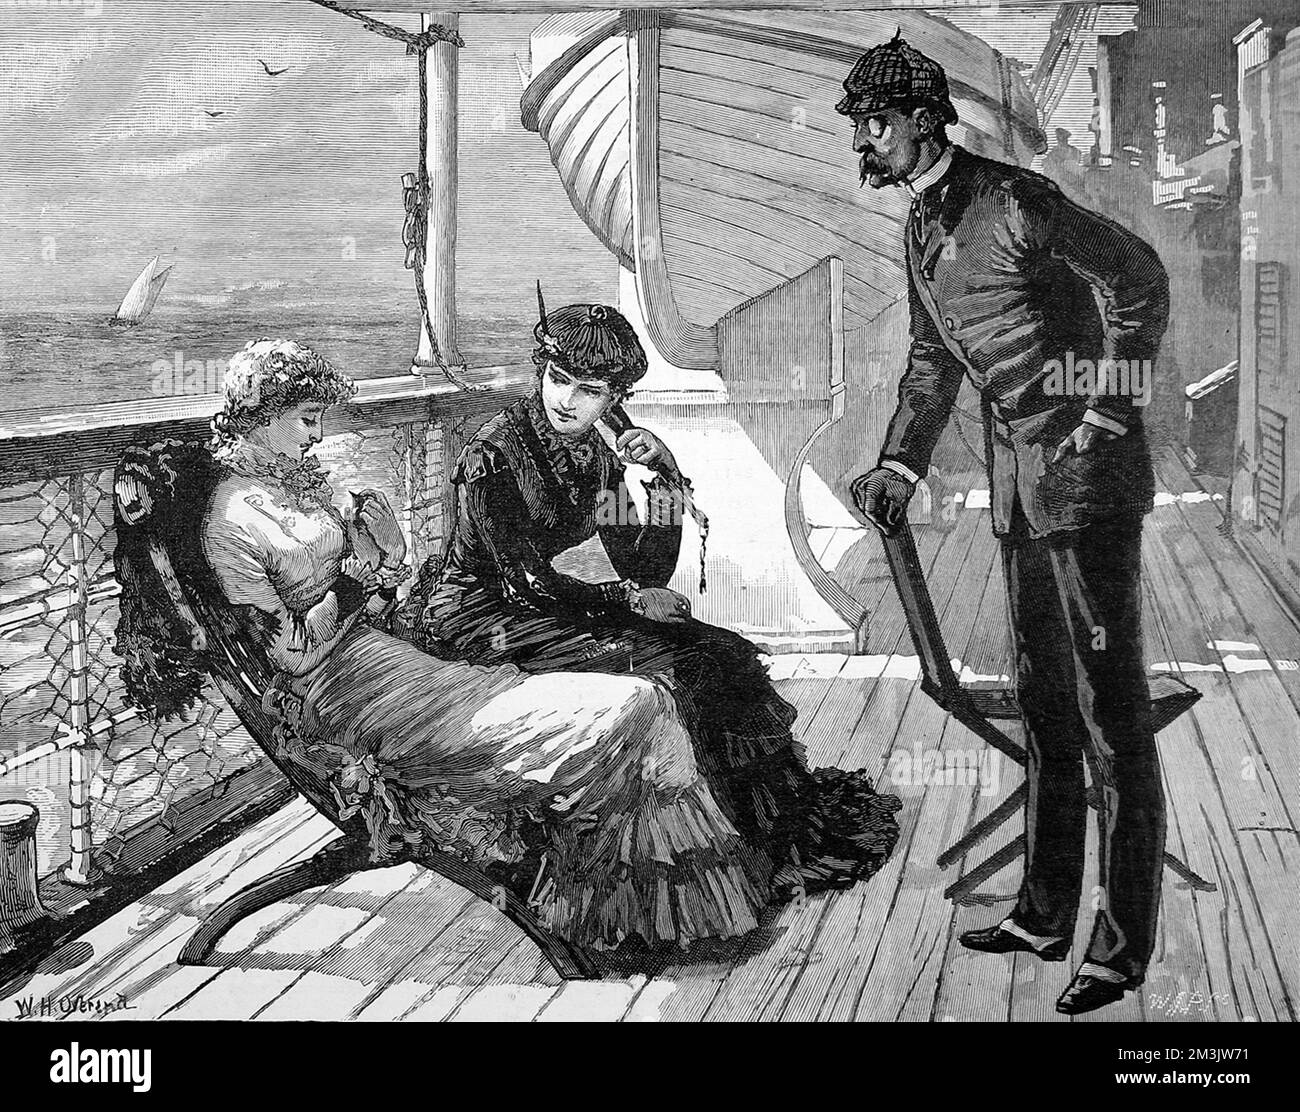 A scene on the deck of a passenger ship, 1883. The lady on the left has caught a swallow, which all three Victorian passengers are admiring.  1883 Stock Photo